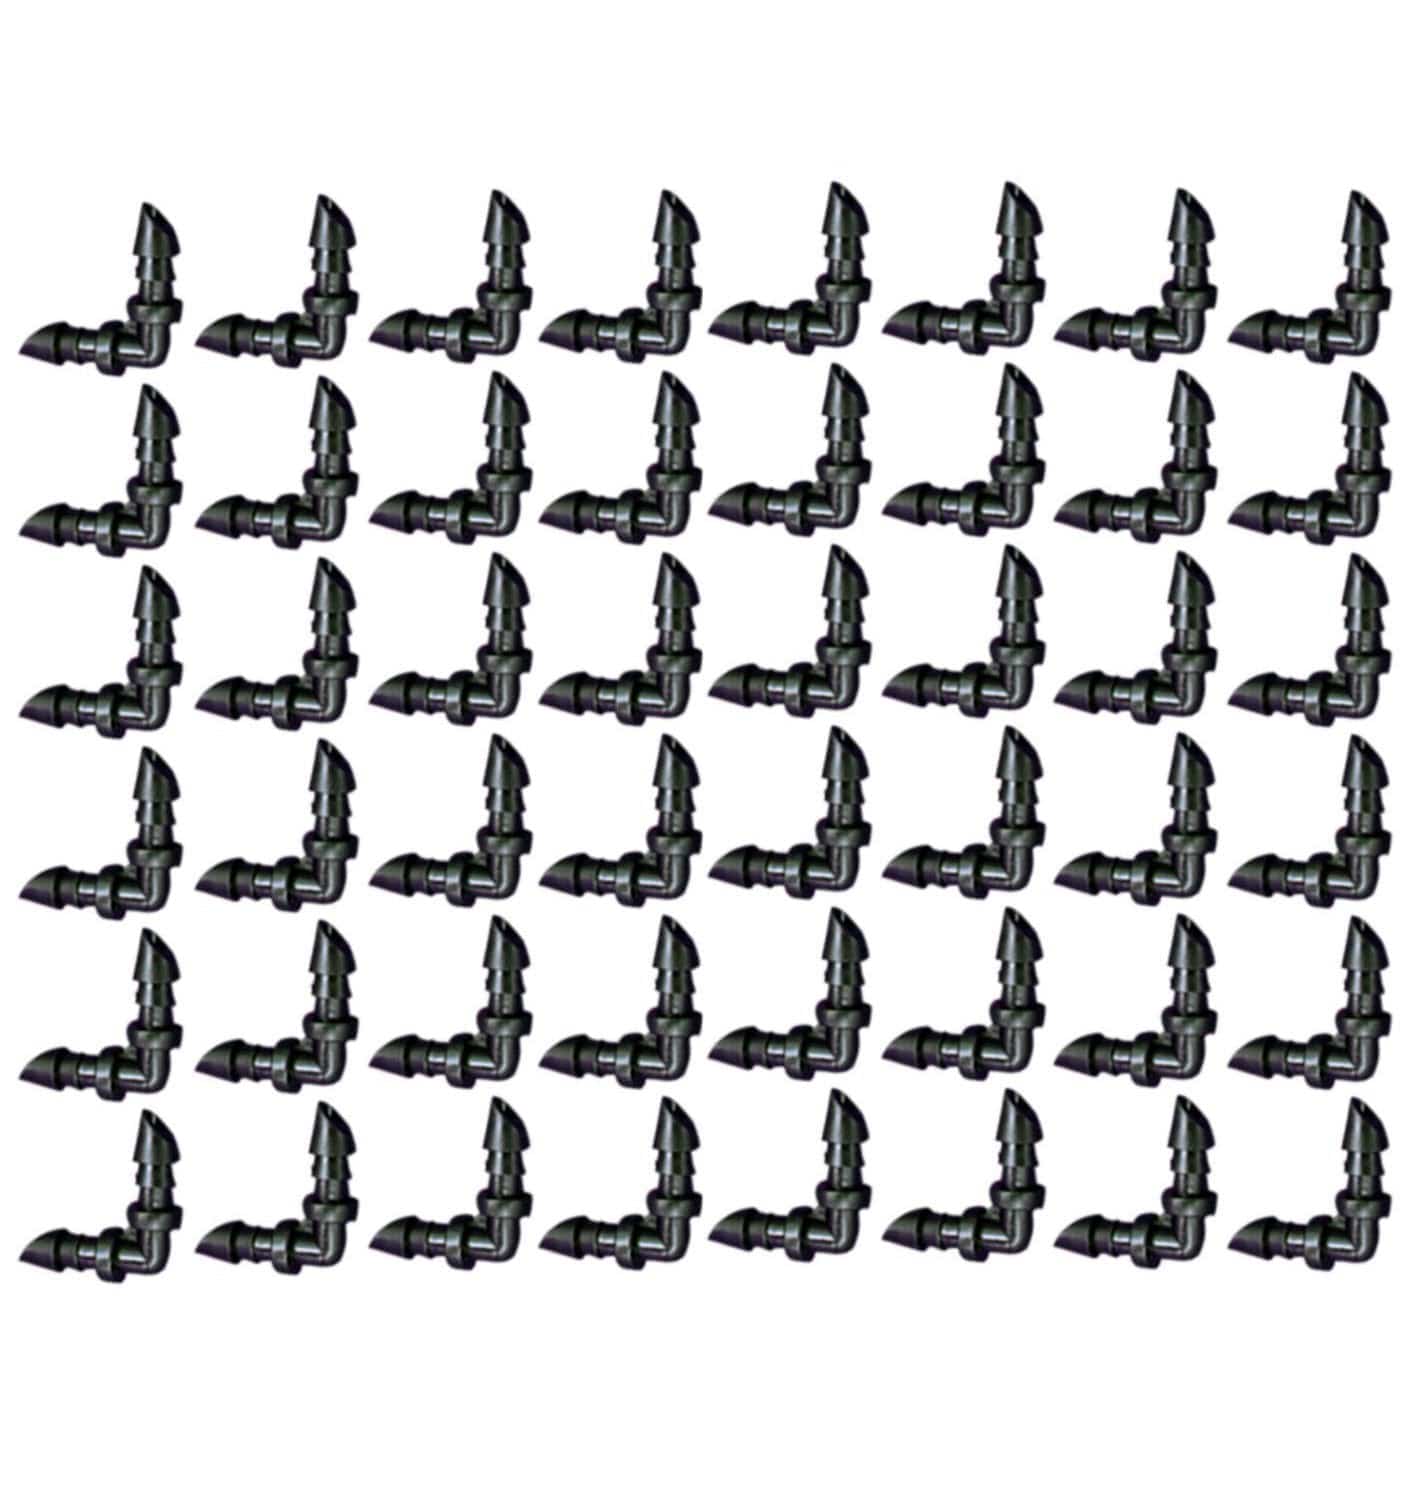 Pinolex Elbow Connector for Drip Irrigation - Barbed Type - 1/4 inch - 4 mm (Pack of 50)